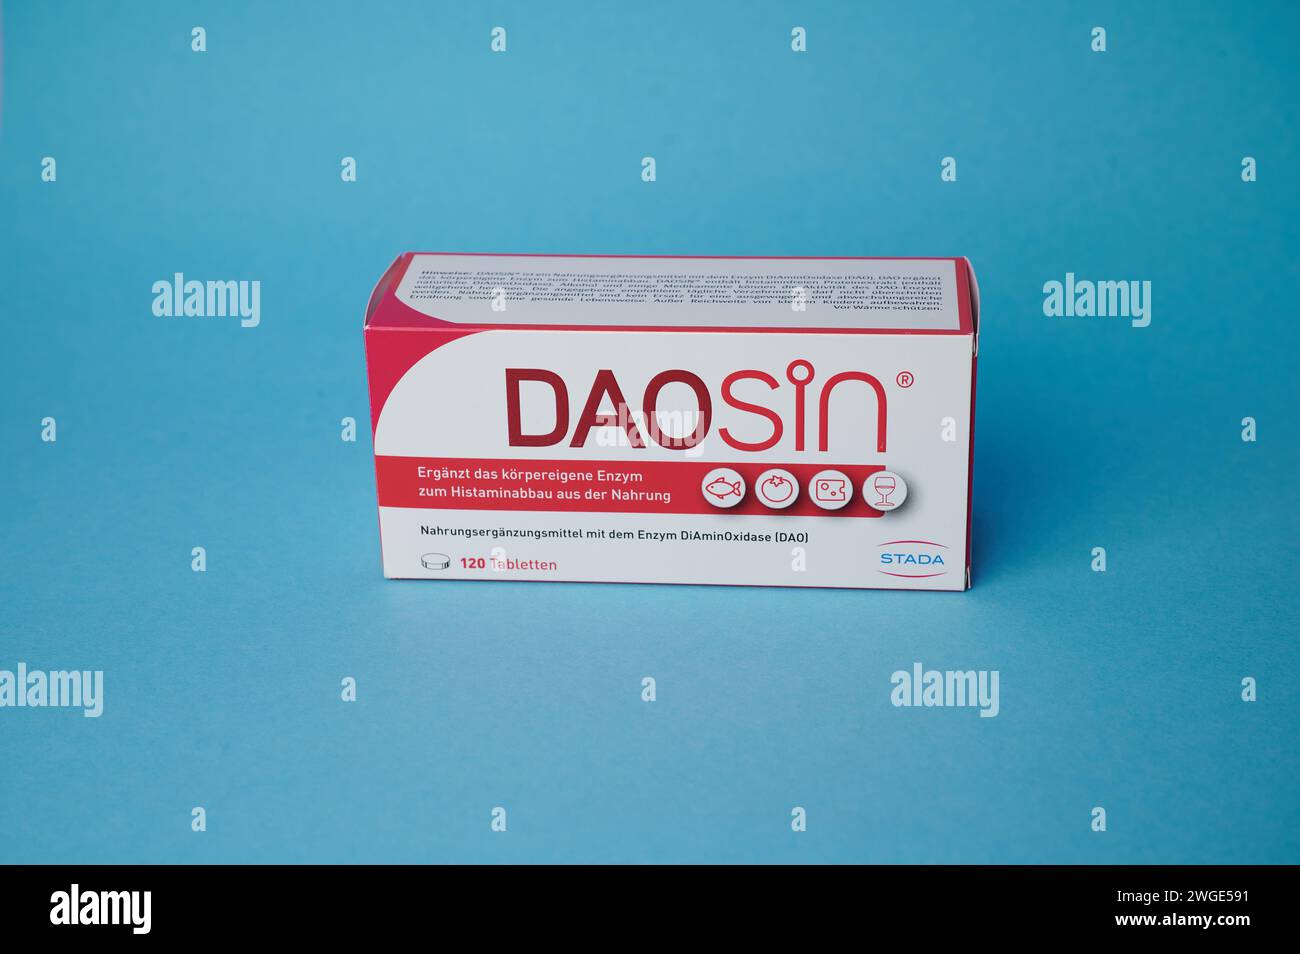 Medicine box with the active ingredient daosin from the pharmaceutical company stada Stock Photo